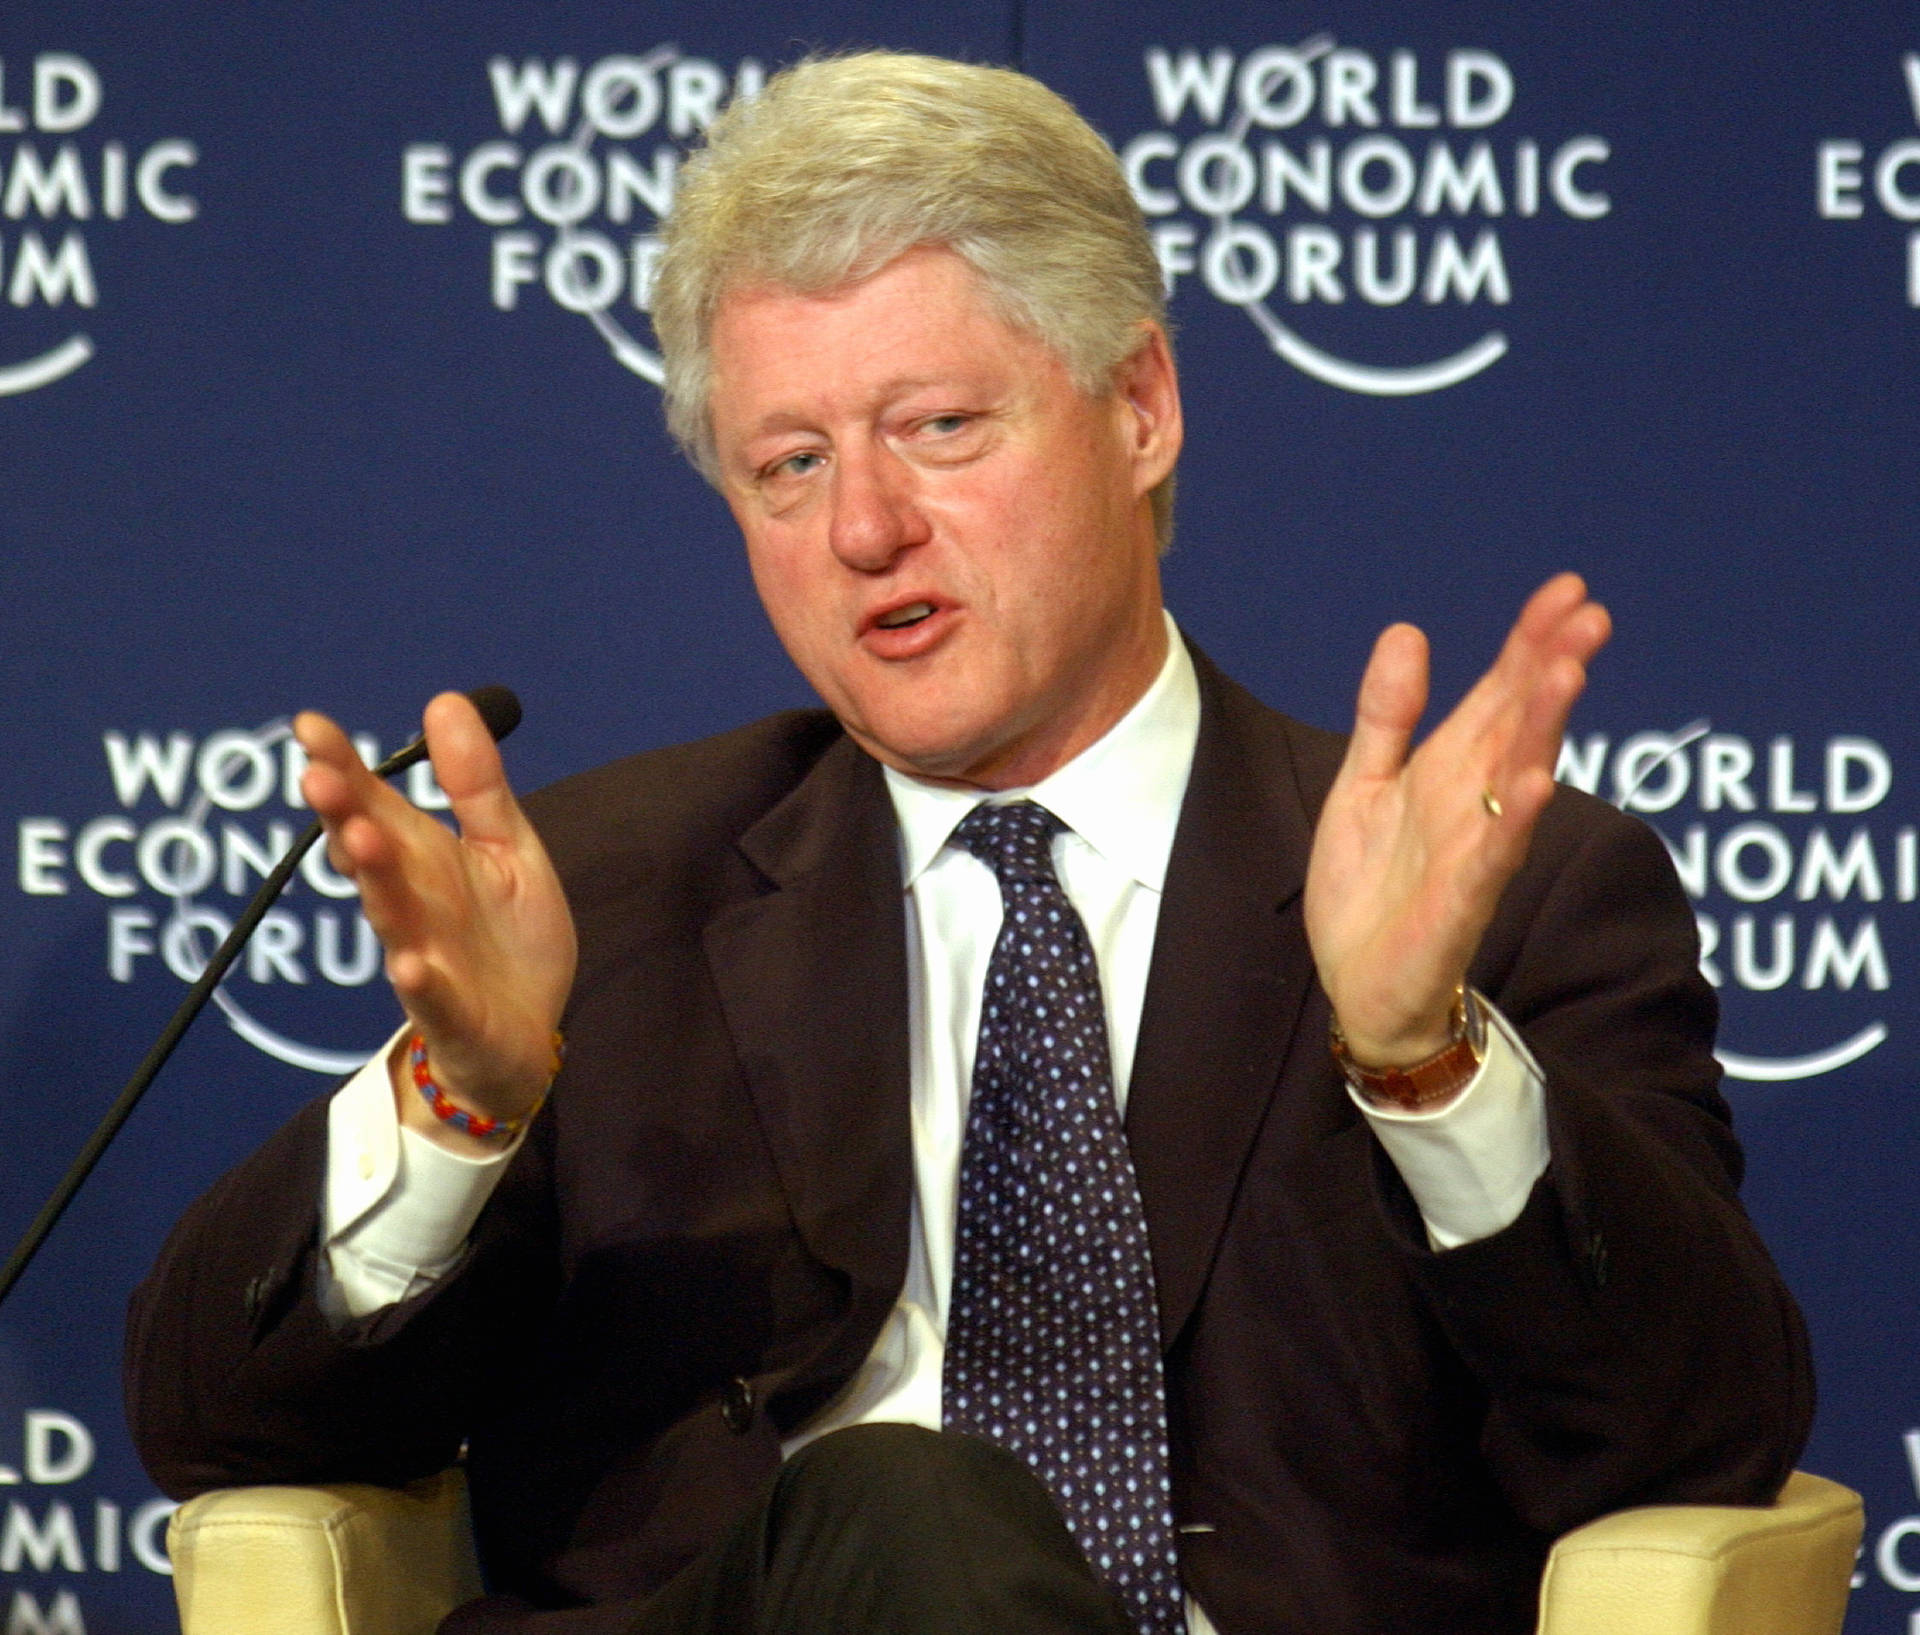 Billclinton World Forum Would Be Translated As 